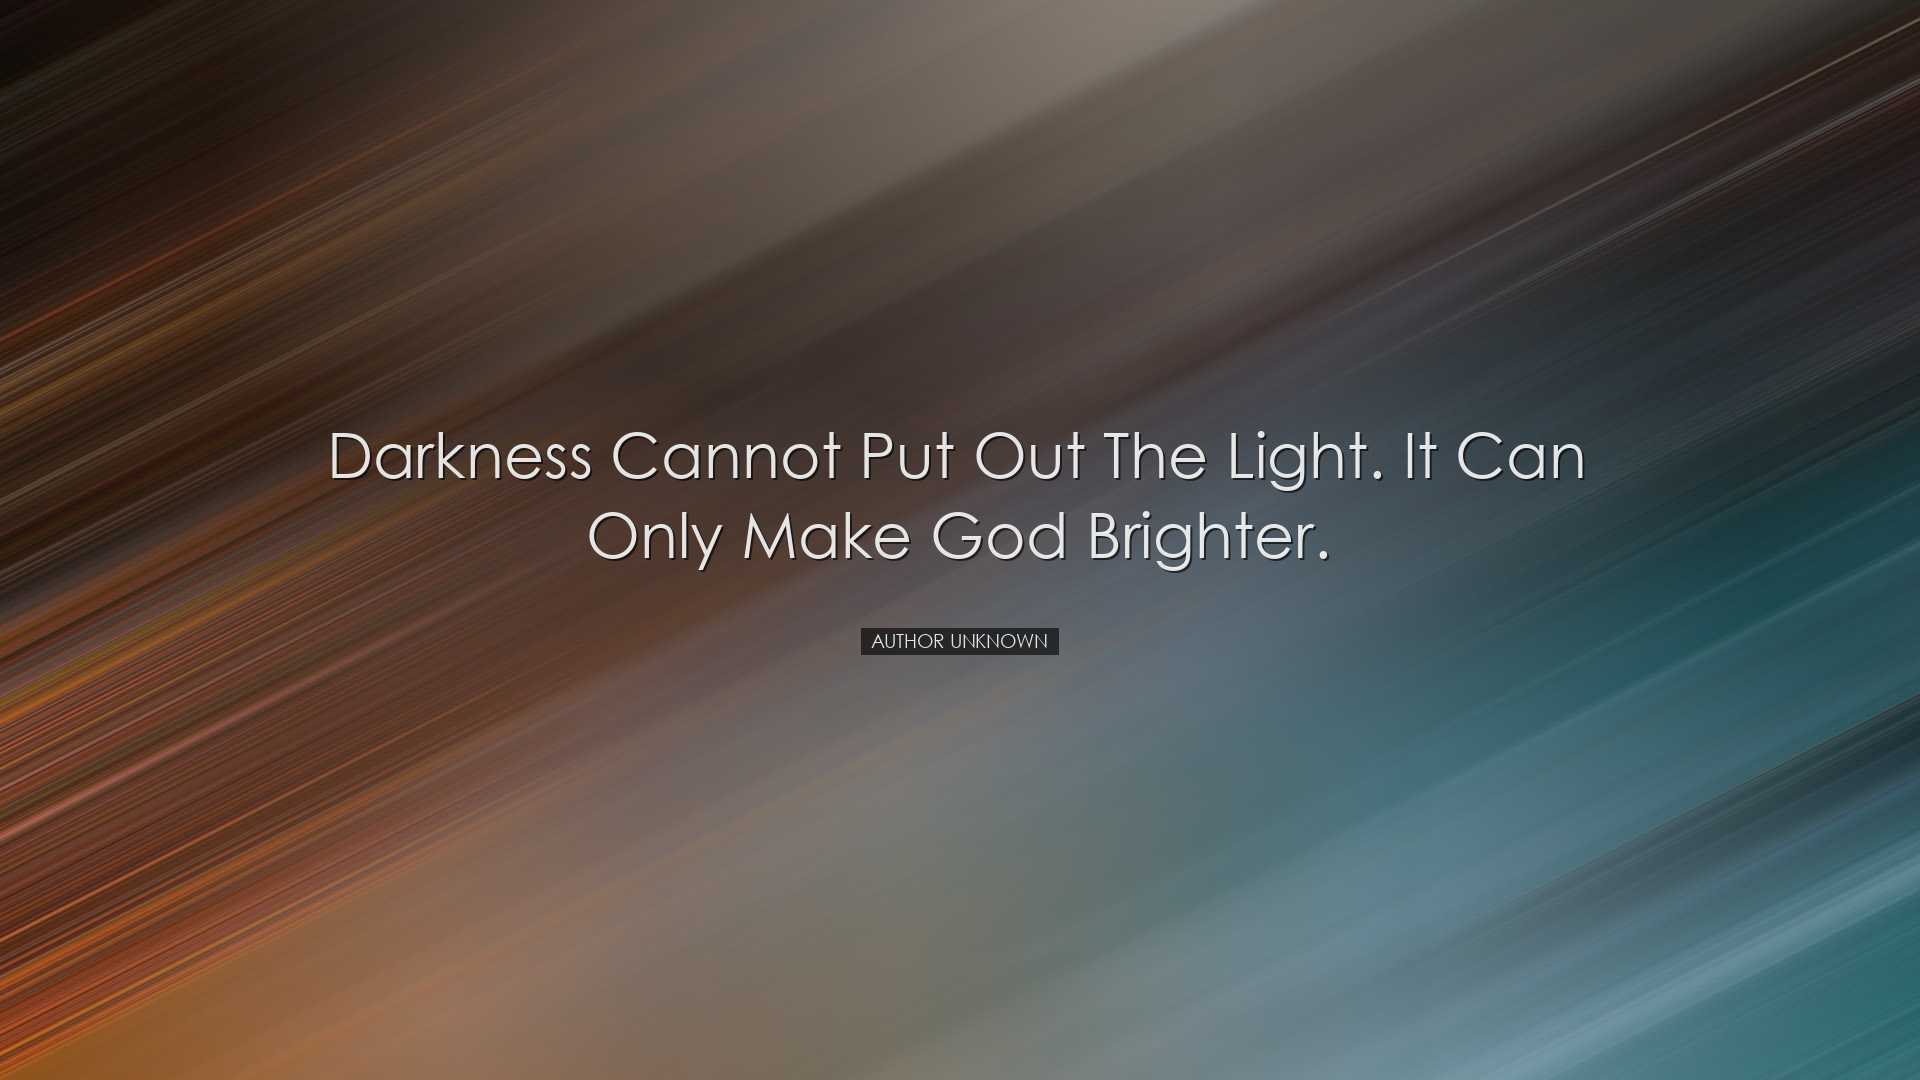 Darkness cannot put out the Light. It can only make God brighter.